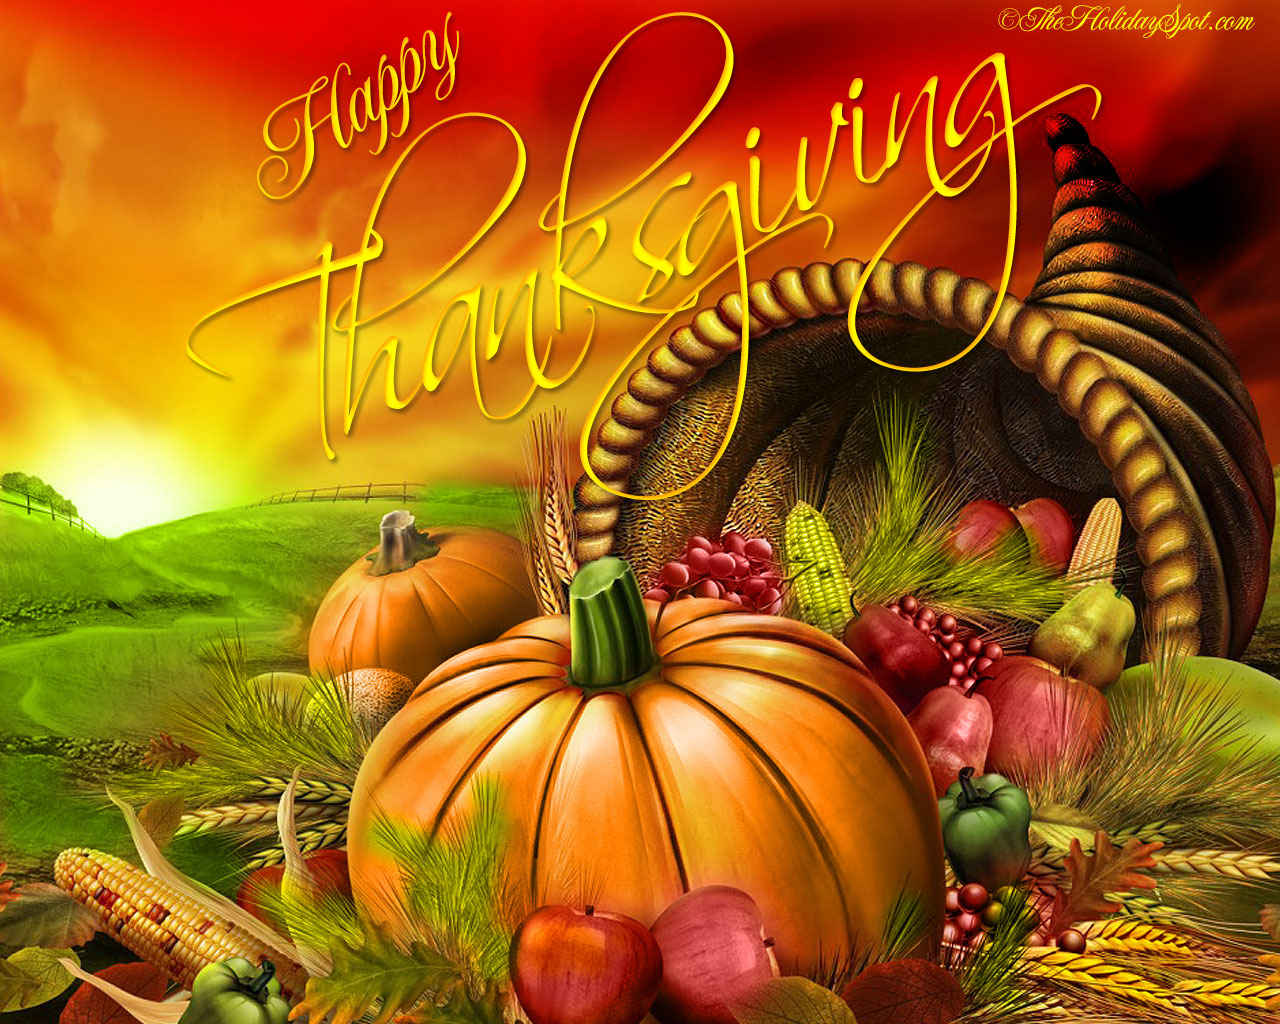 Happy Thanksgiving 2016 Images Wallpapers, Backgrounds, Images